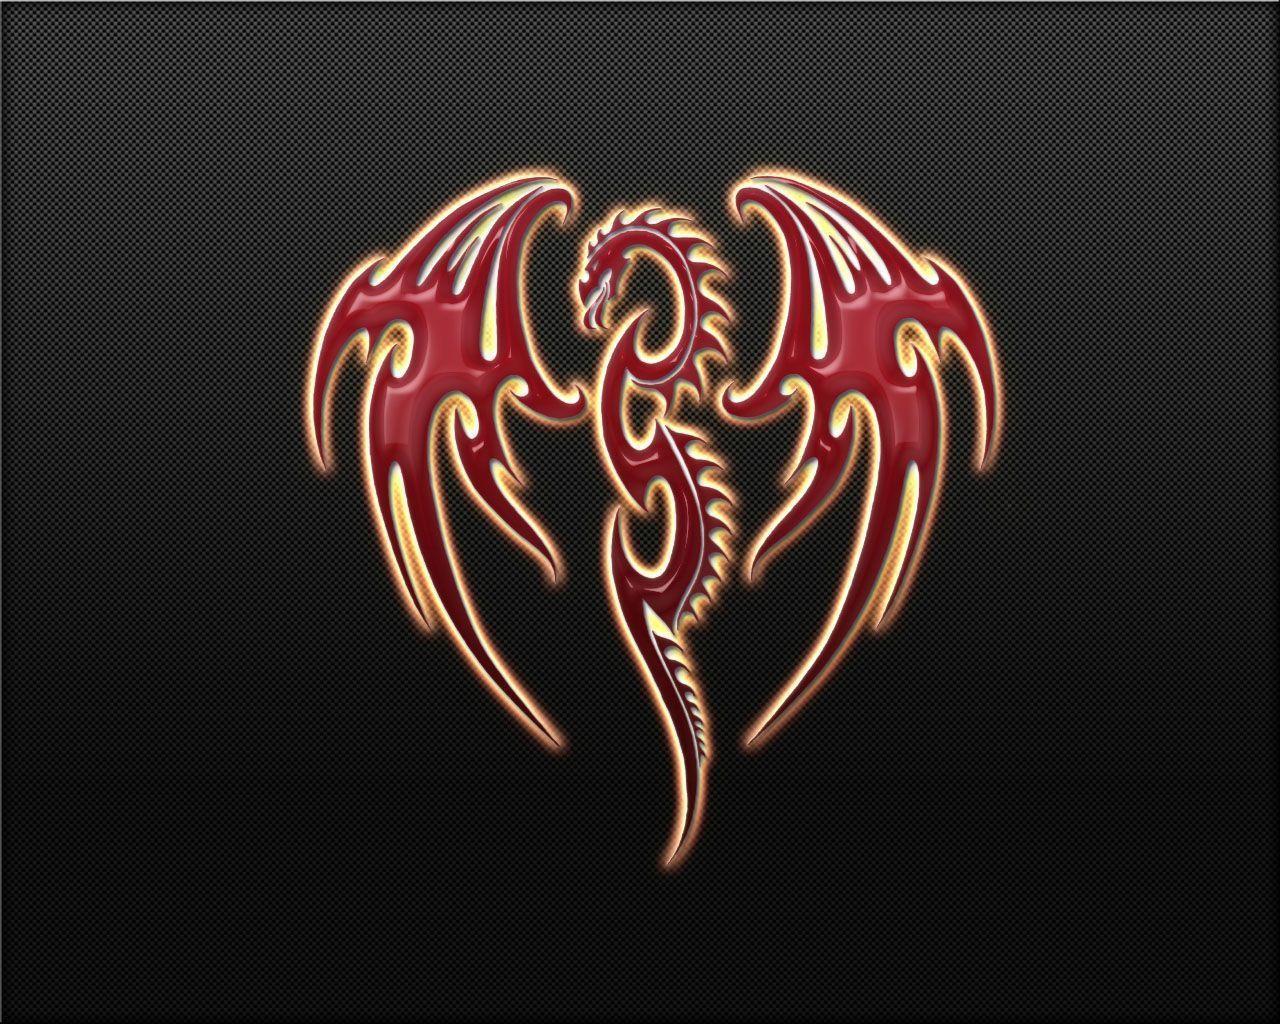 Enjoy our wallpaper of the month!!! Red Dragons. Red Dragons